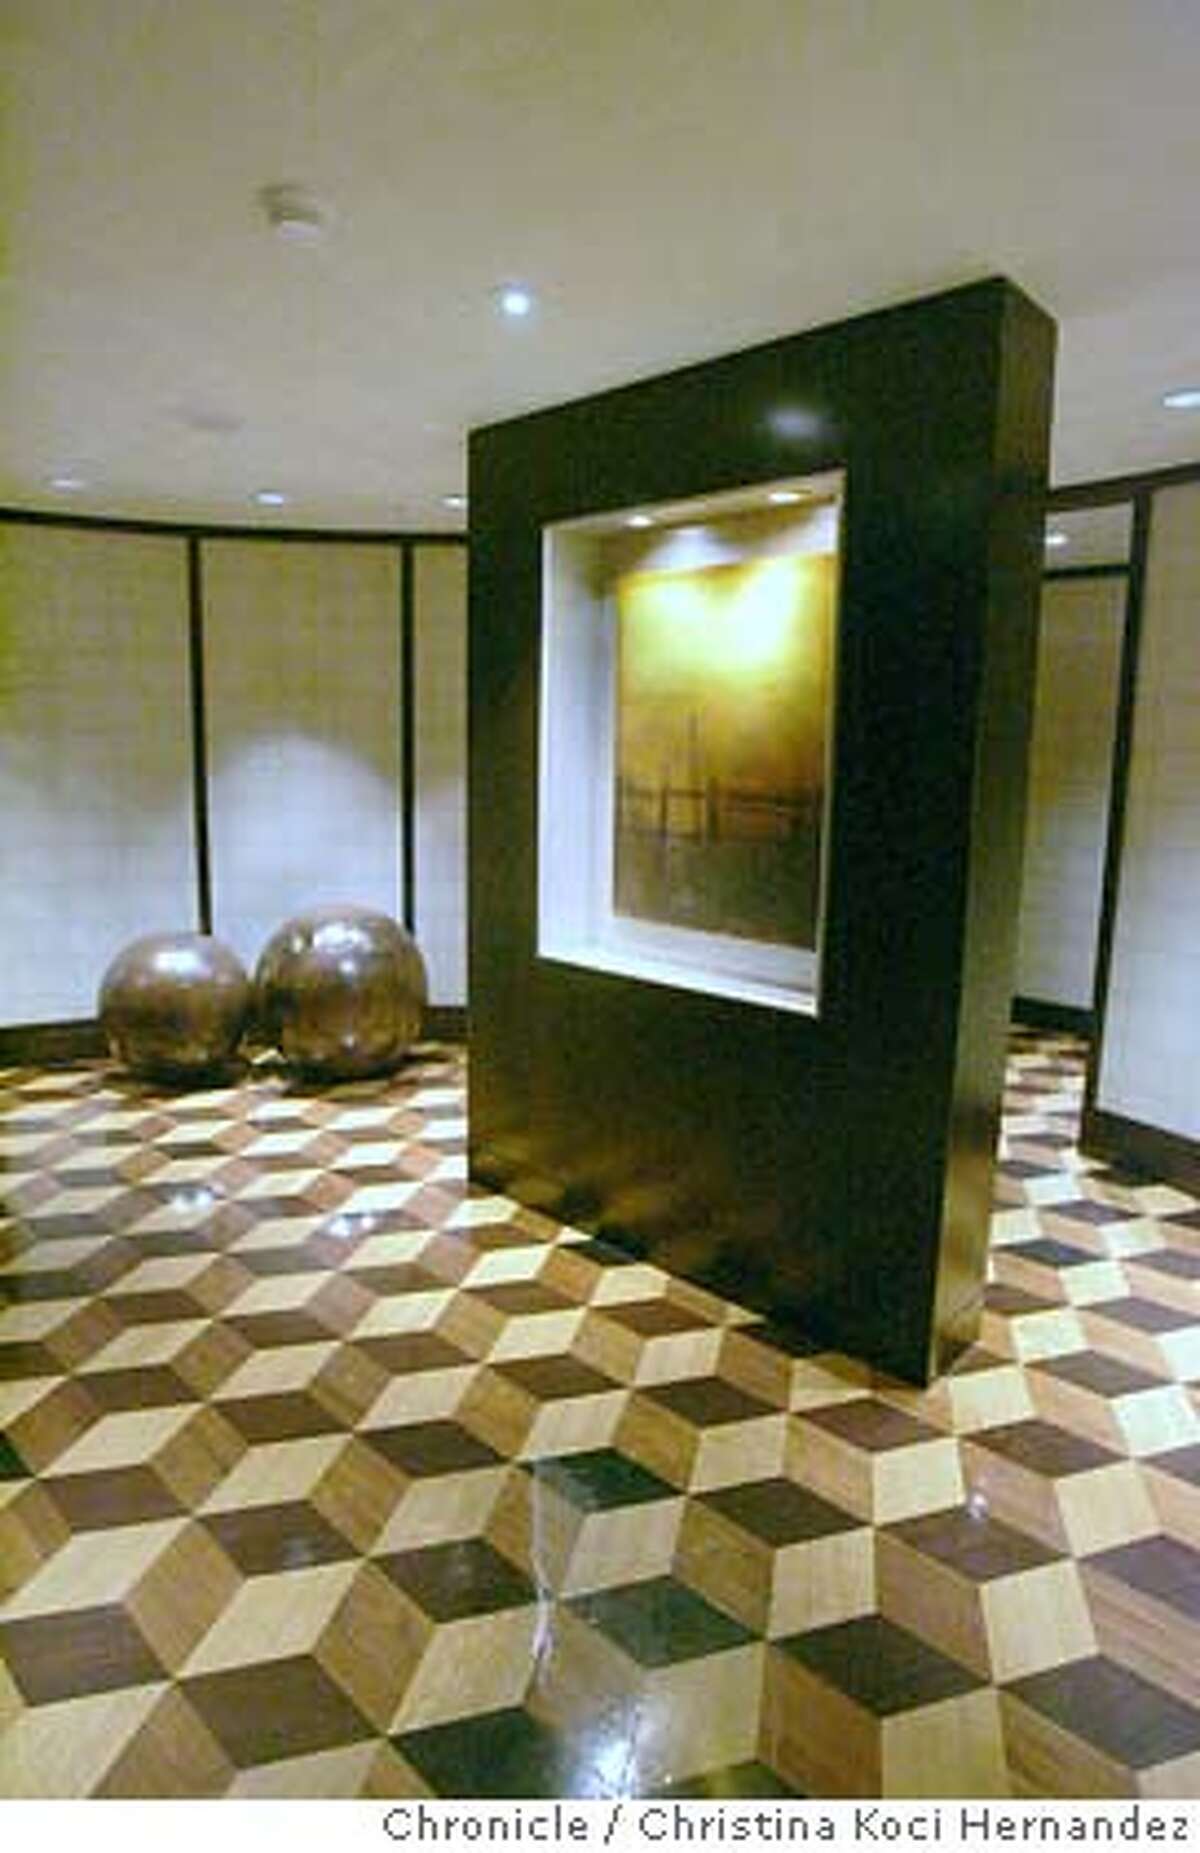 CHRISTINA KOCI HERNANDEZ/CHRONICLE A foyer. The San Francisco operator of boutique hotels, the Kimpton Group is expanding nationally and rolling out new Hotel Palomars, one of its hip brands, which is modeled on the Hotel Palomar at the southwest corner of Fourth and Market. We'd like a shot illustrating the sleek and offbeat nature of the hotel's interior design. Niki Leondakis, the Kimpton Group's chief operating officer and one of the key interviewees in the story, will be present for the shoot. She should be in some, but not all, of the shots.